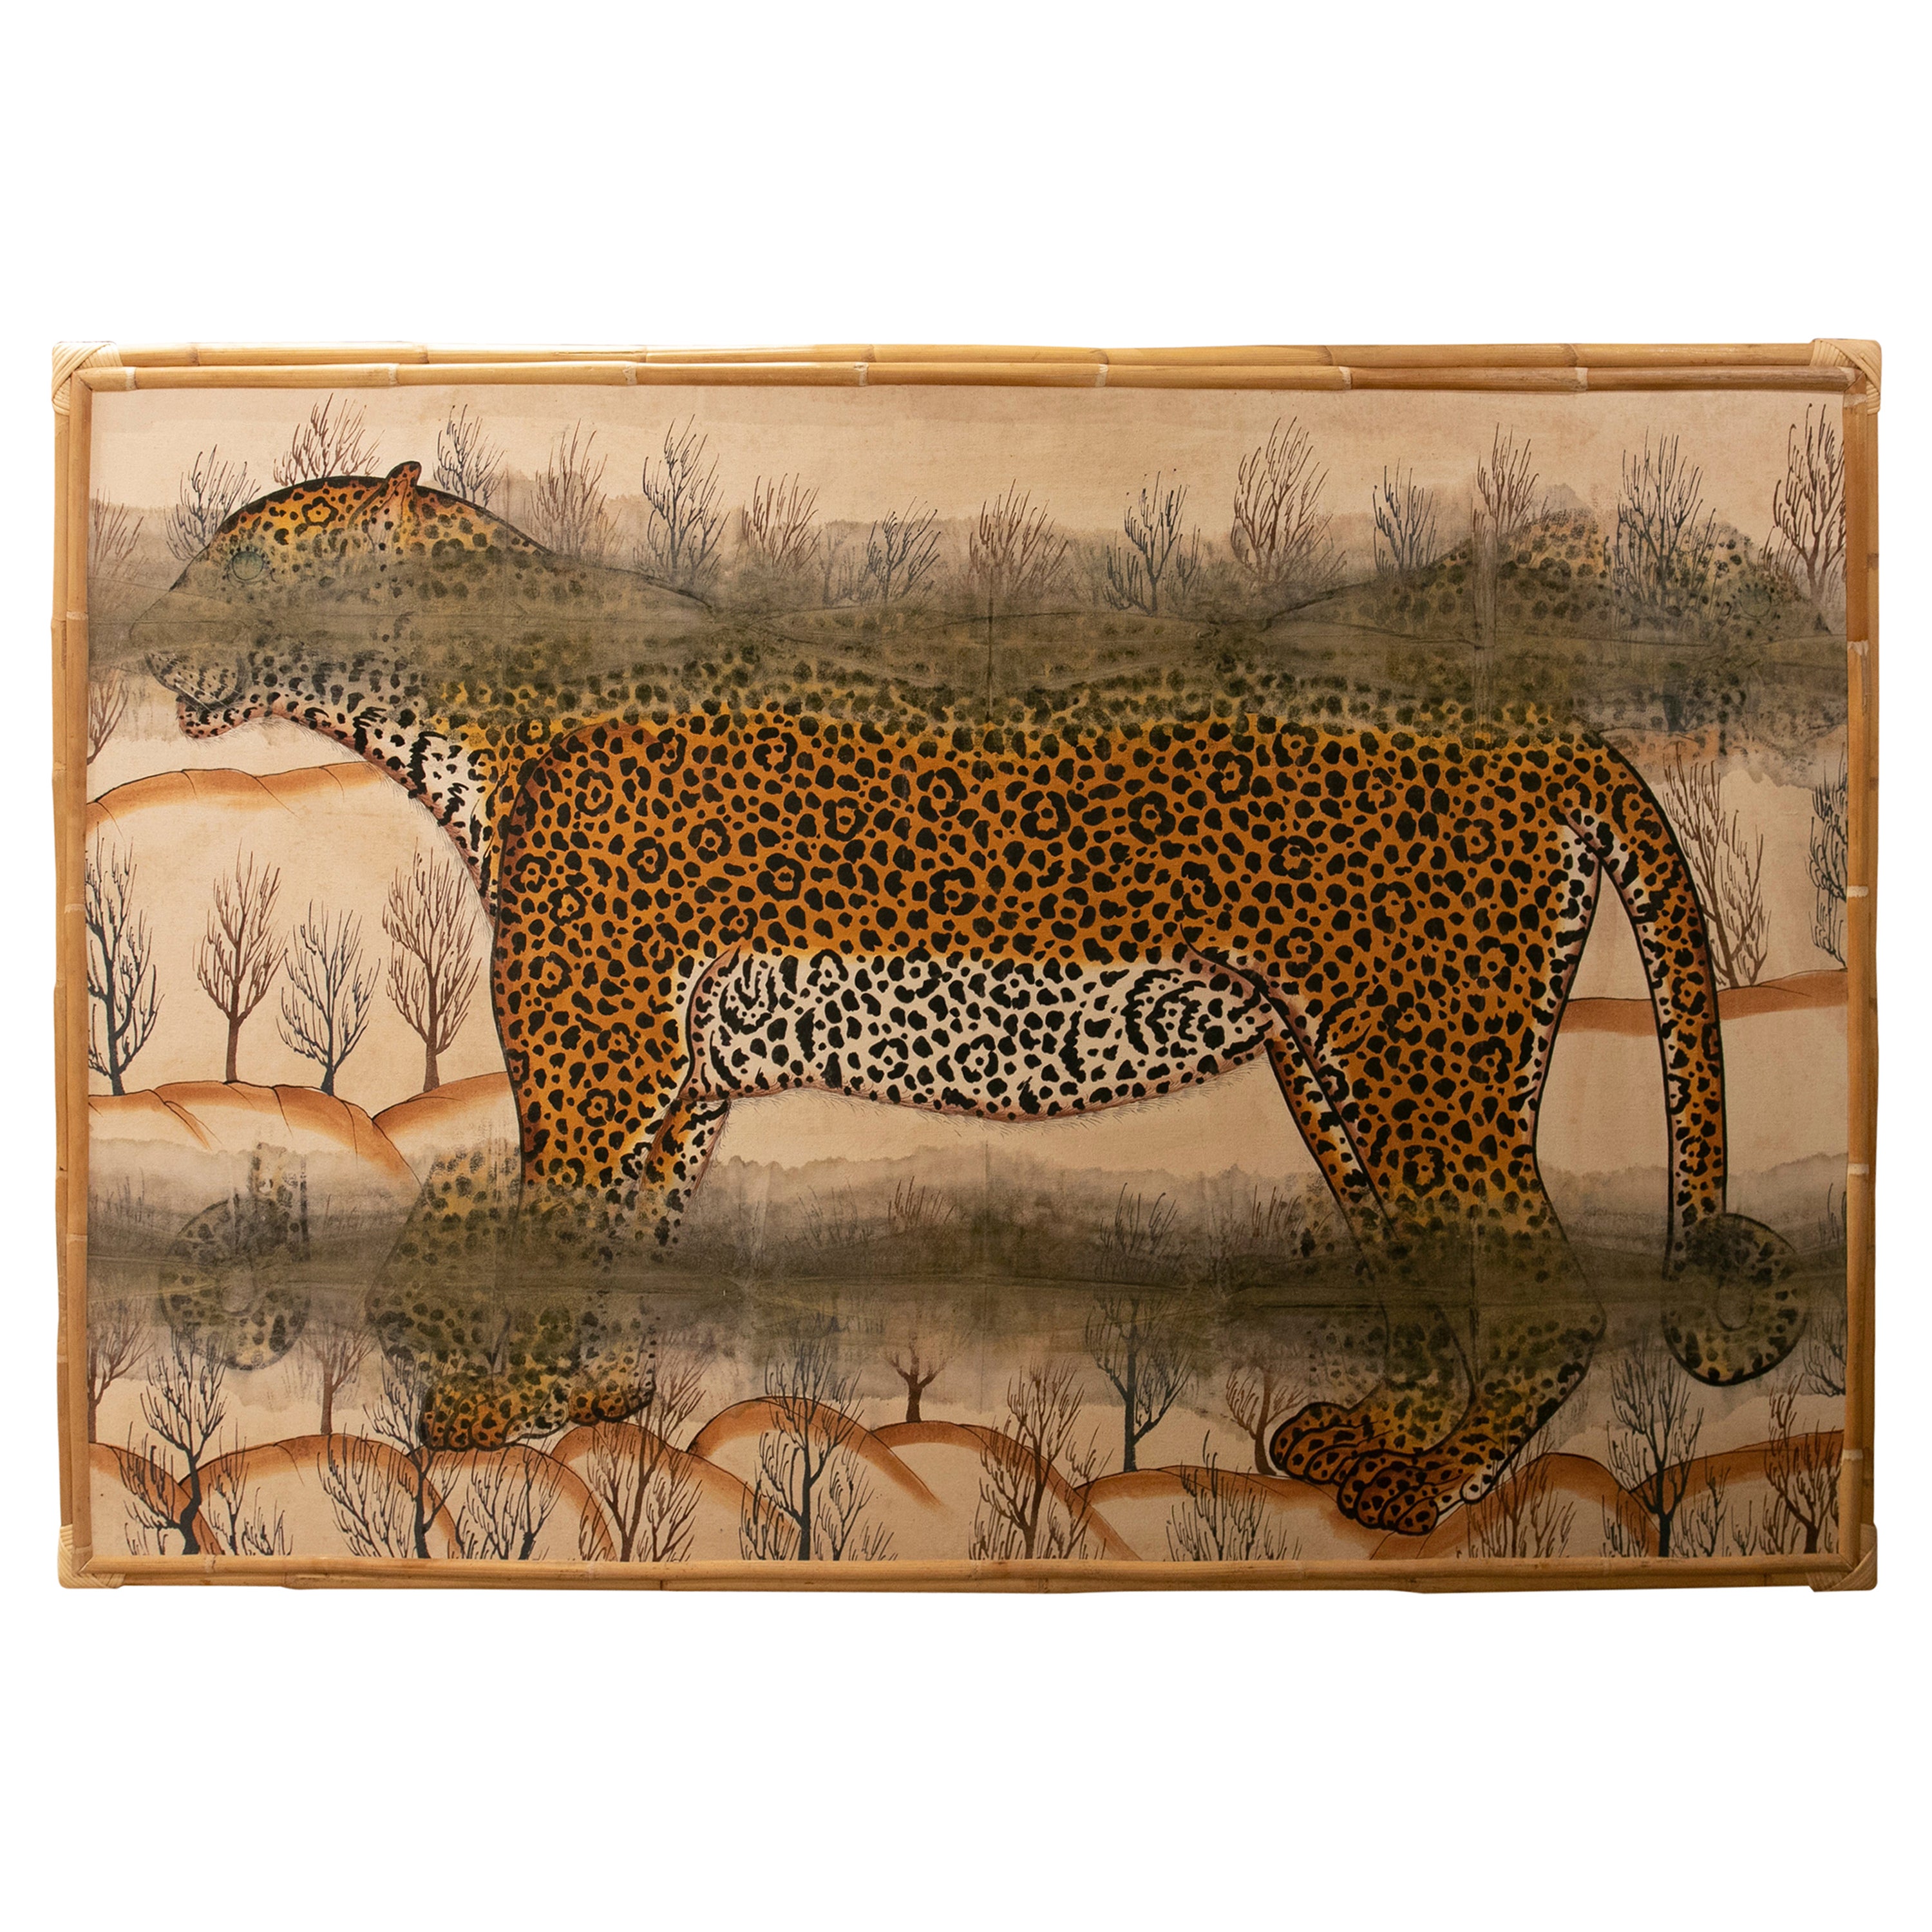 Tiger Painting Designed by Jaime Parlade, Painted on Canvas with a Bamboo Frame